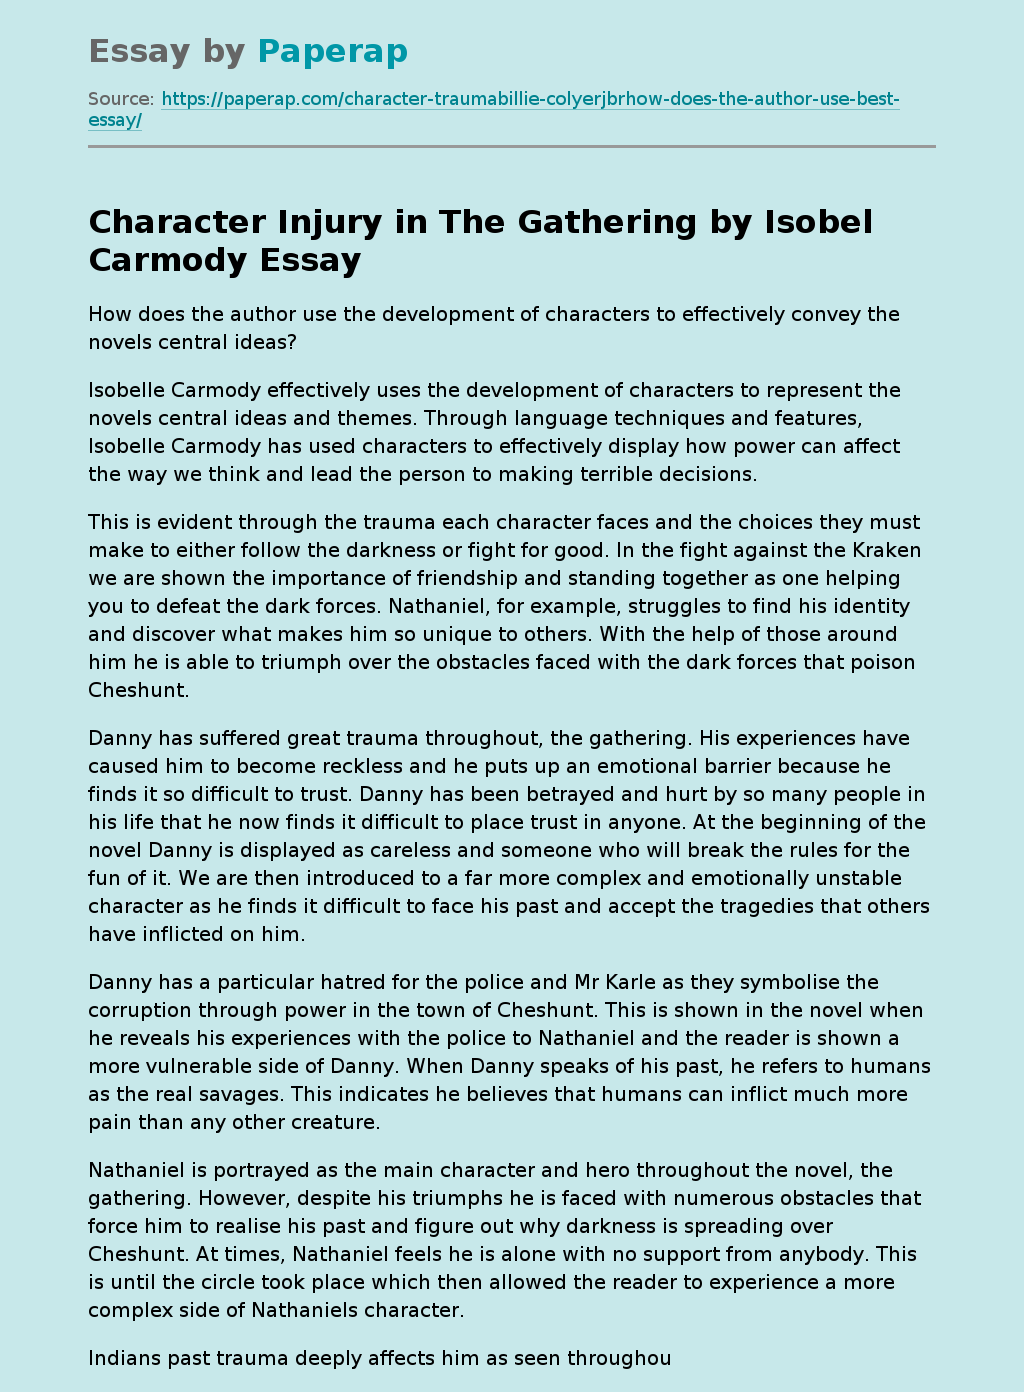 Character Injury in The Gathering by Isobel Carmody